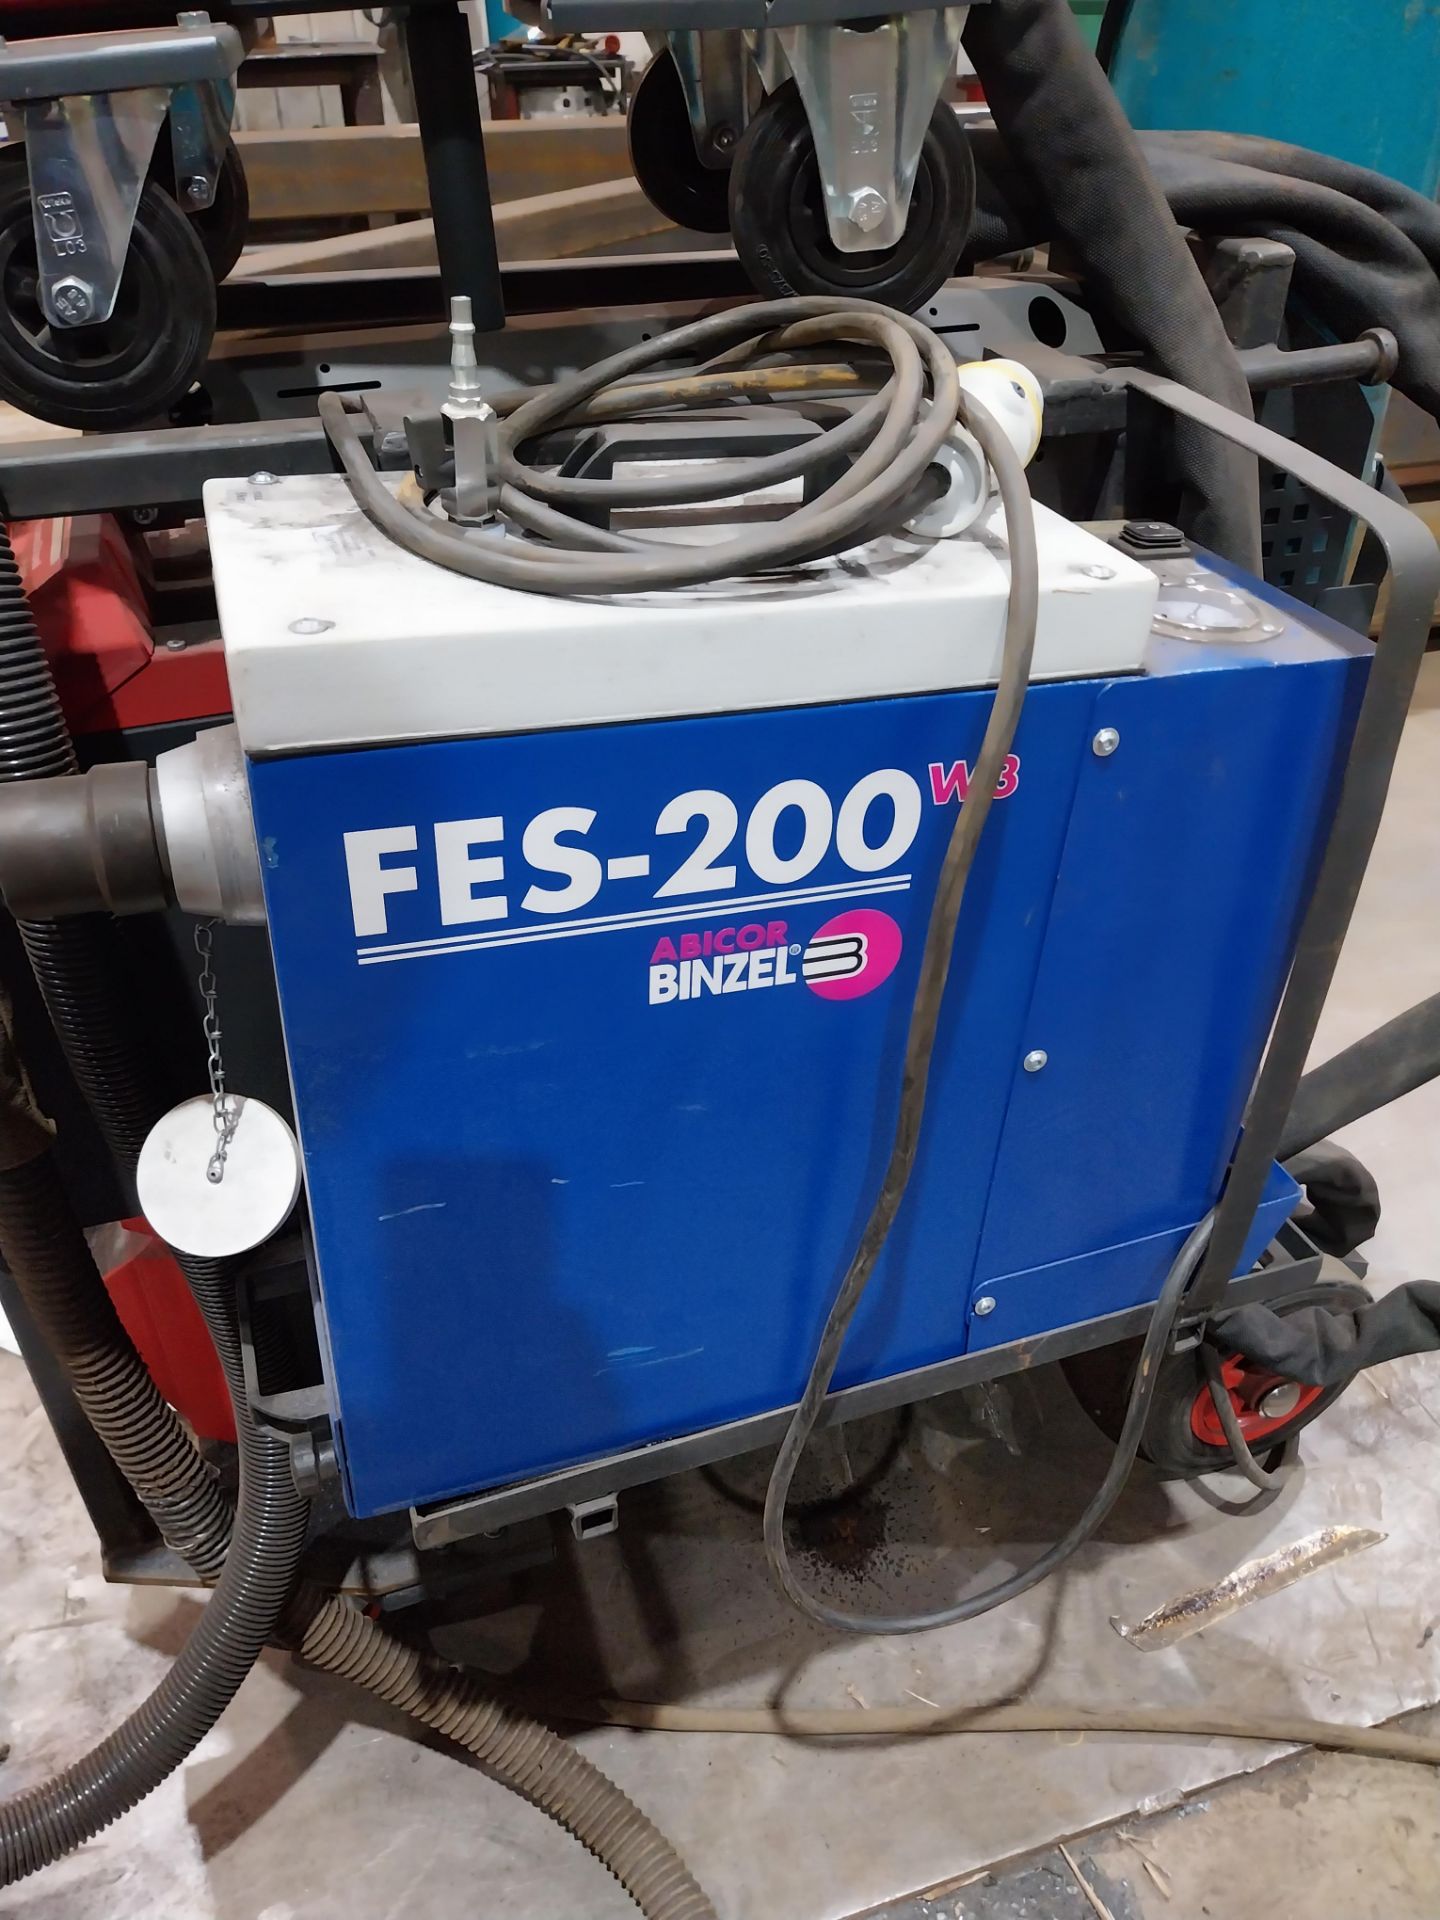 Fronius Transsteel 5000 Pulse mig welder with VR5000 wire feed, FES-200 W3 extractor, torch and - Image 6 of 8